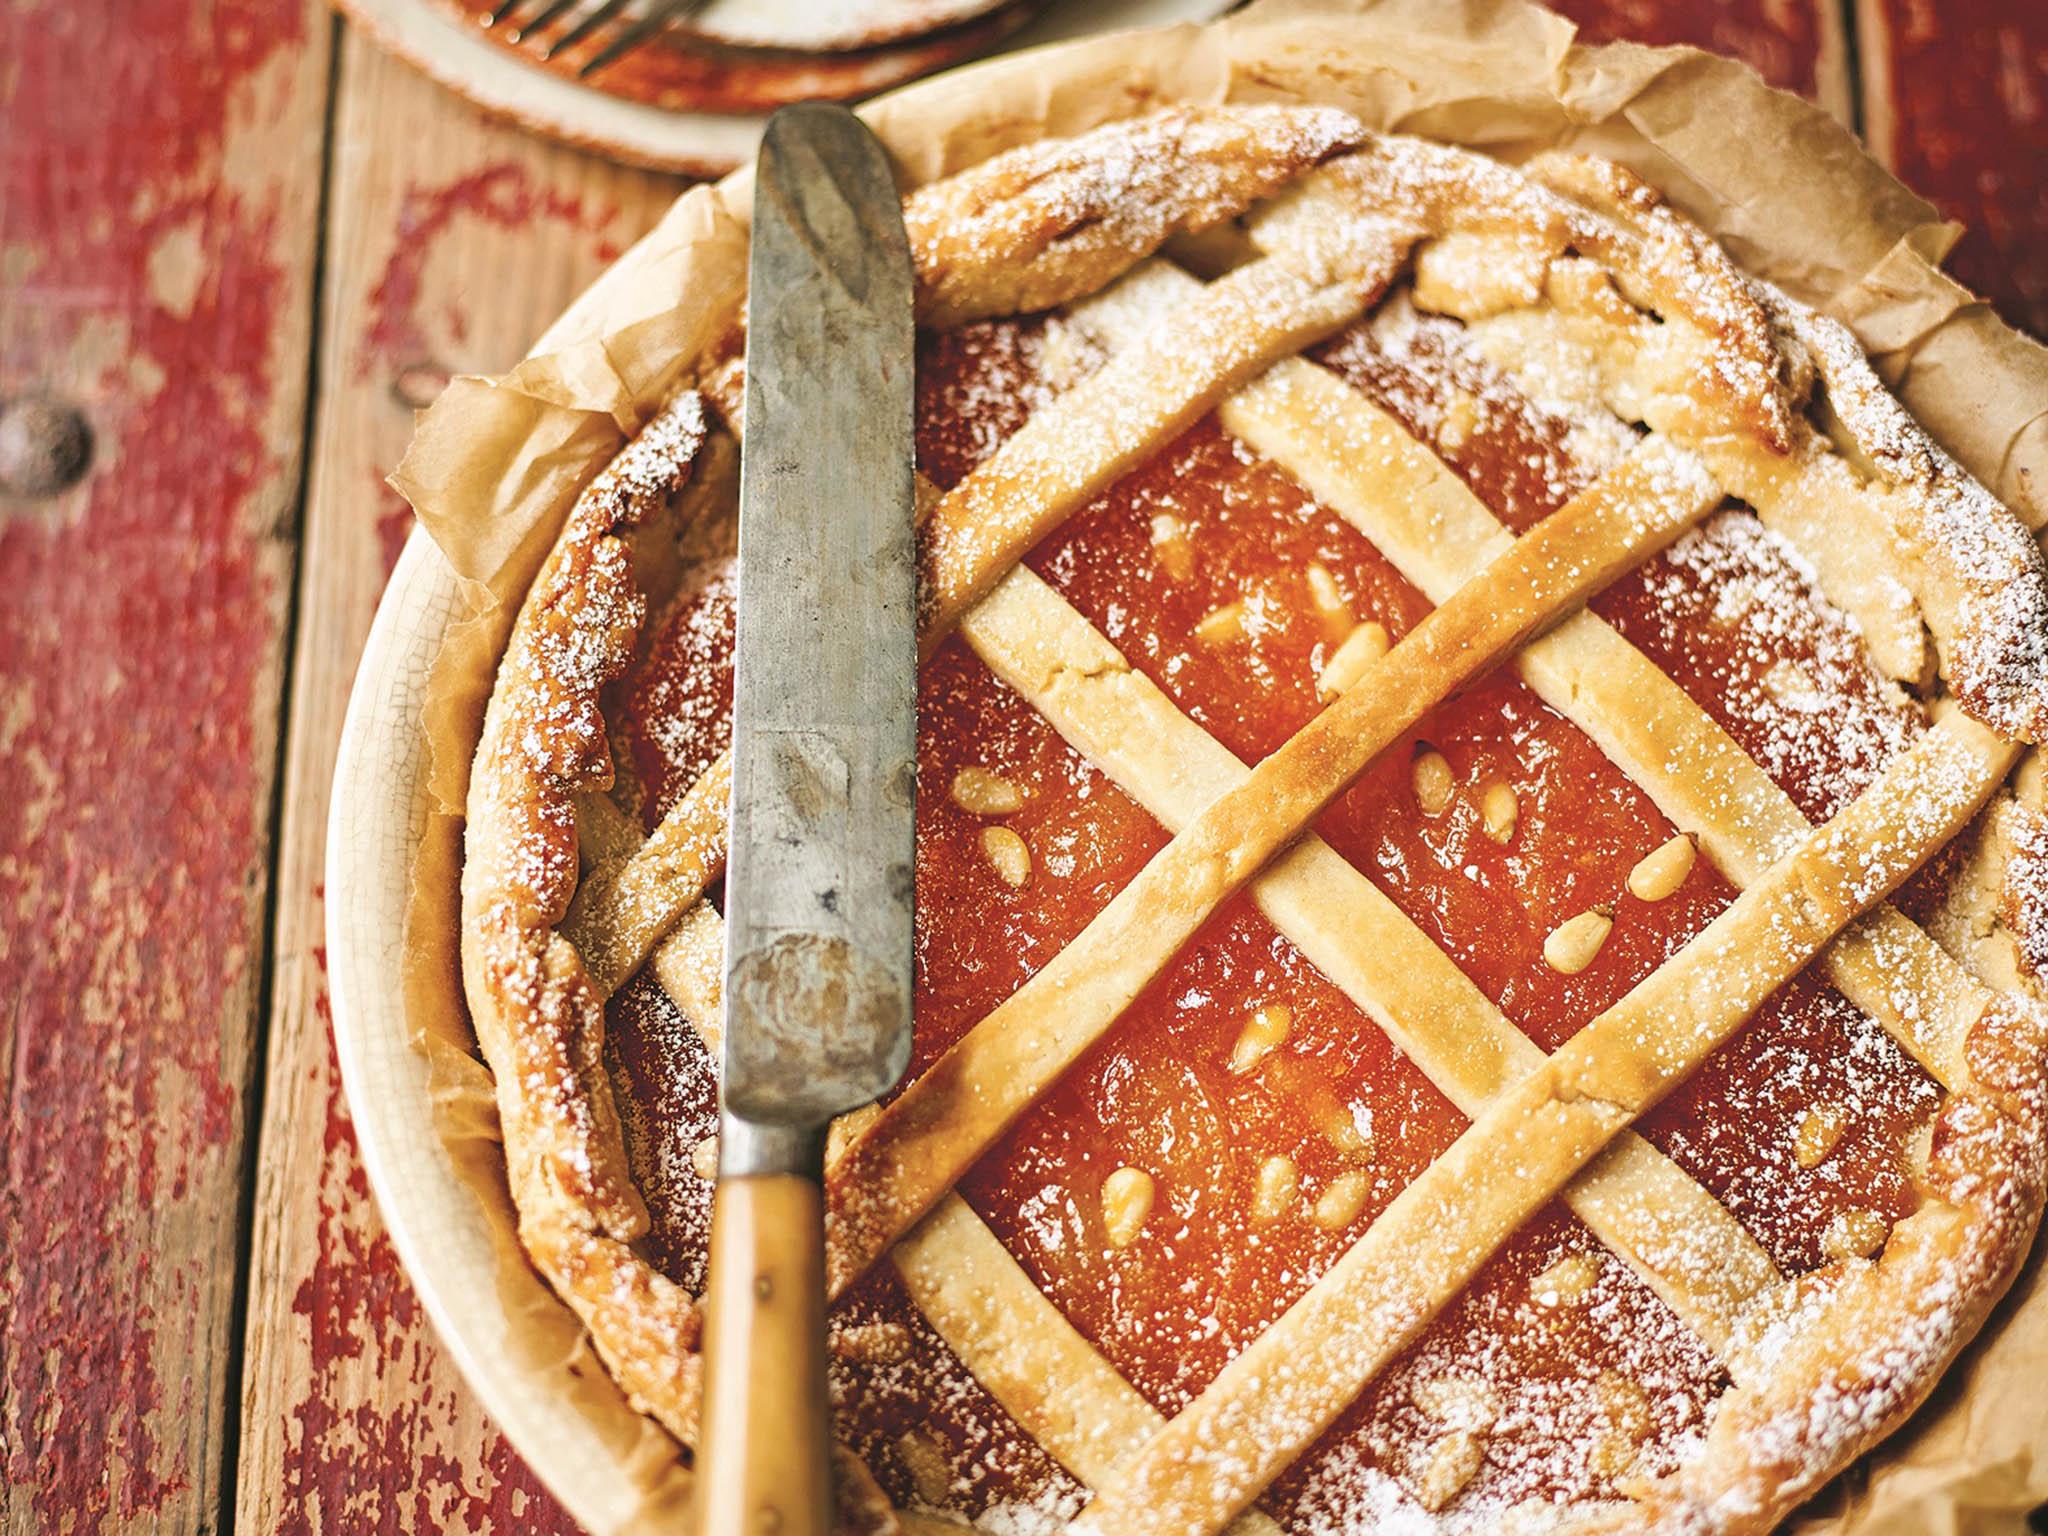 This lovely rustic tart made with dried apricots will sweeten your day